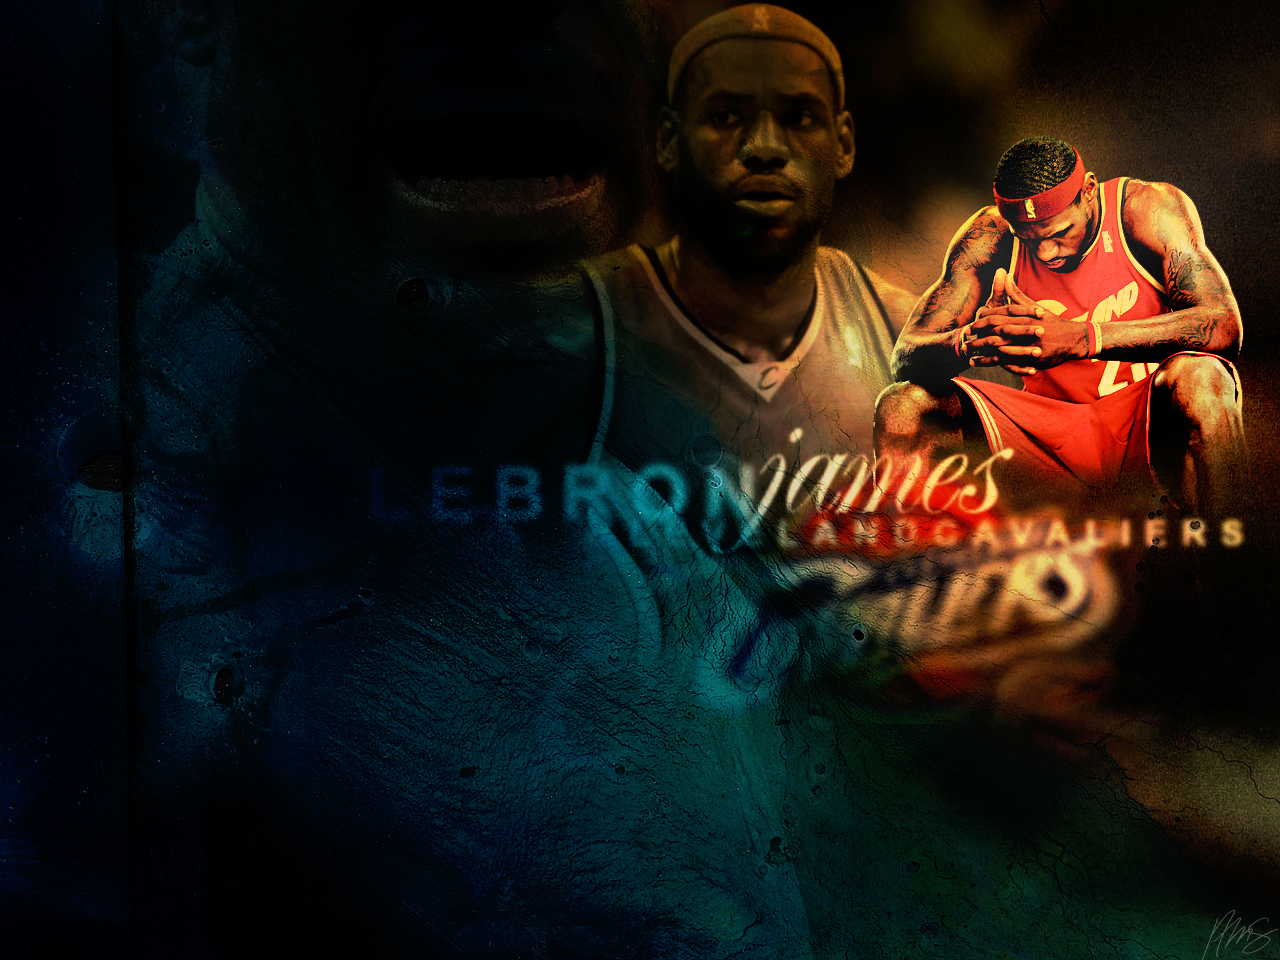  wallpaper other 2009 2015 witnessgfx lebron james wallpaper stocks and 1280x960